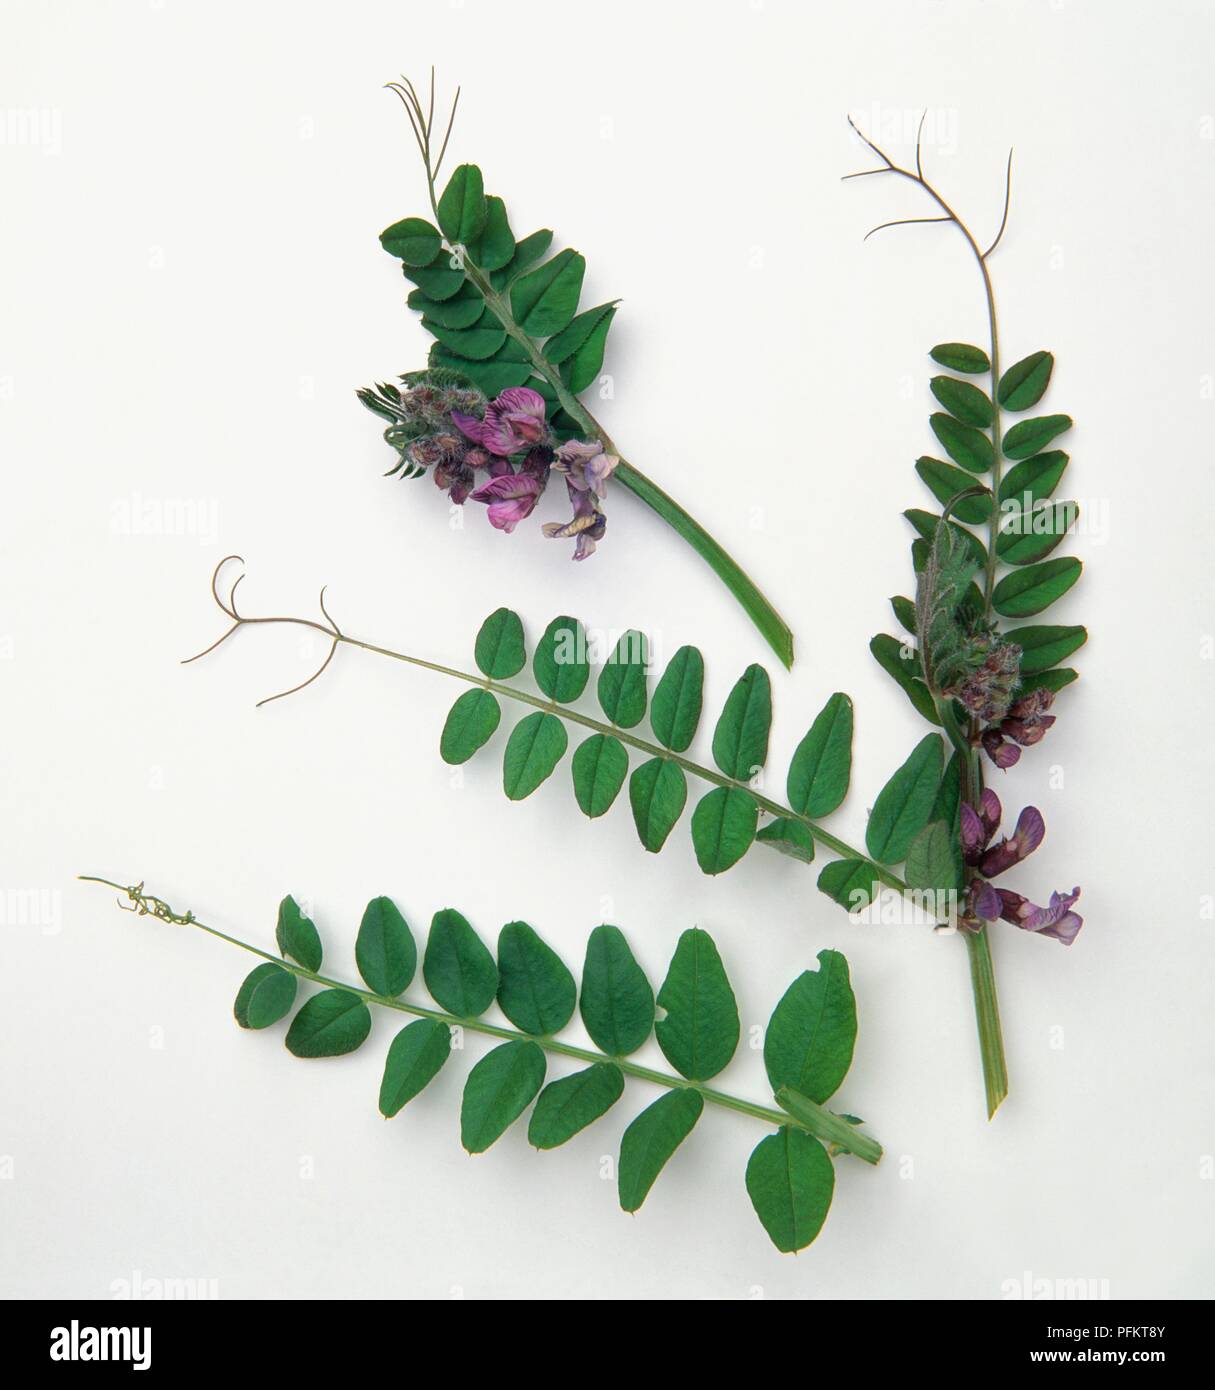 Vicia sepium (Bush vetch), stems with pinnate leaves and purple flowers Stock Photo